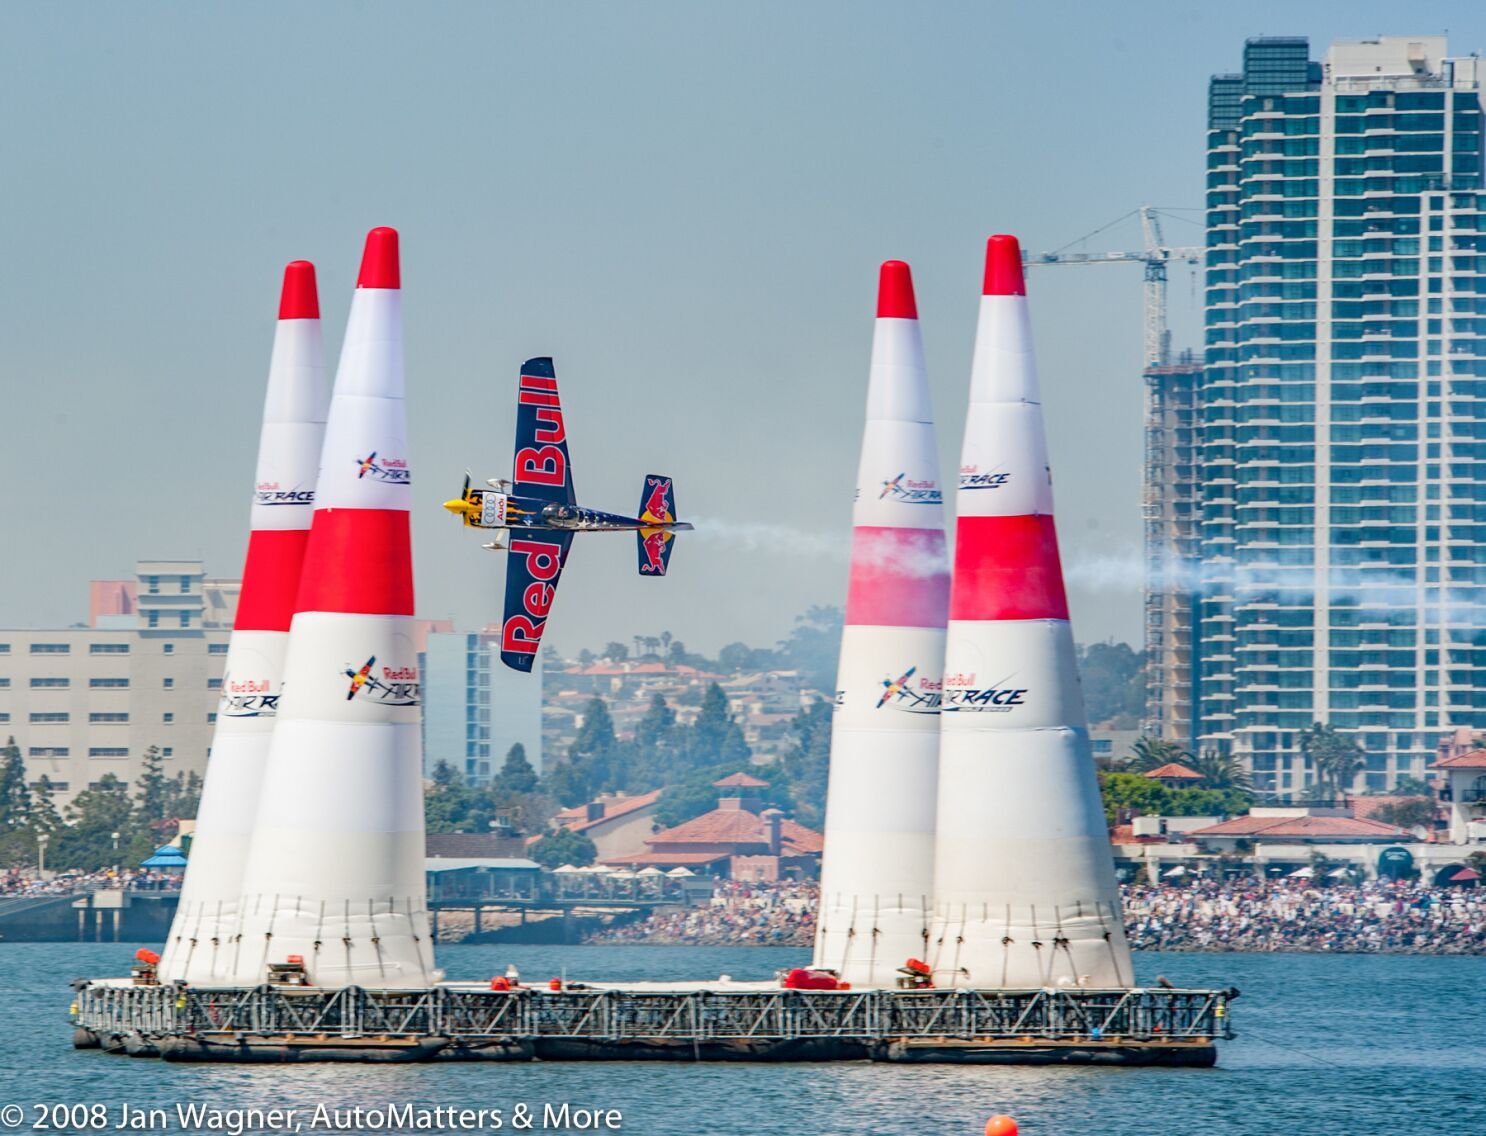 AutoMatters & More: Red Air Race Championship to San Diego - Del Mar